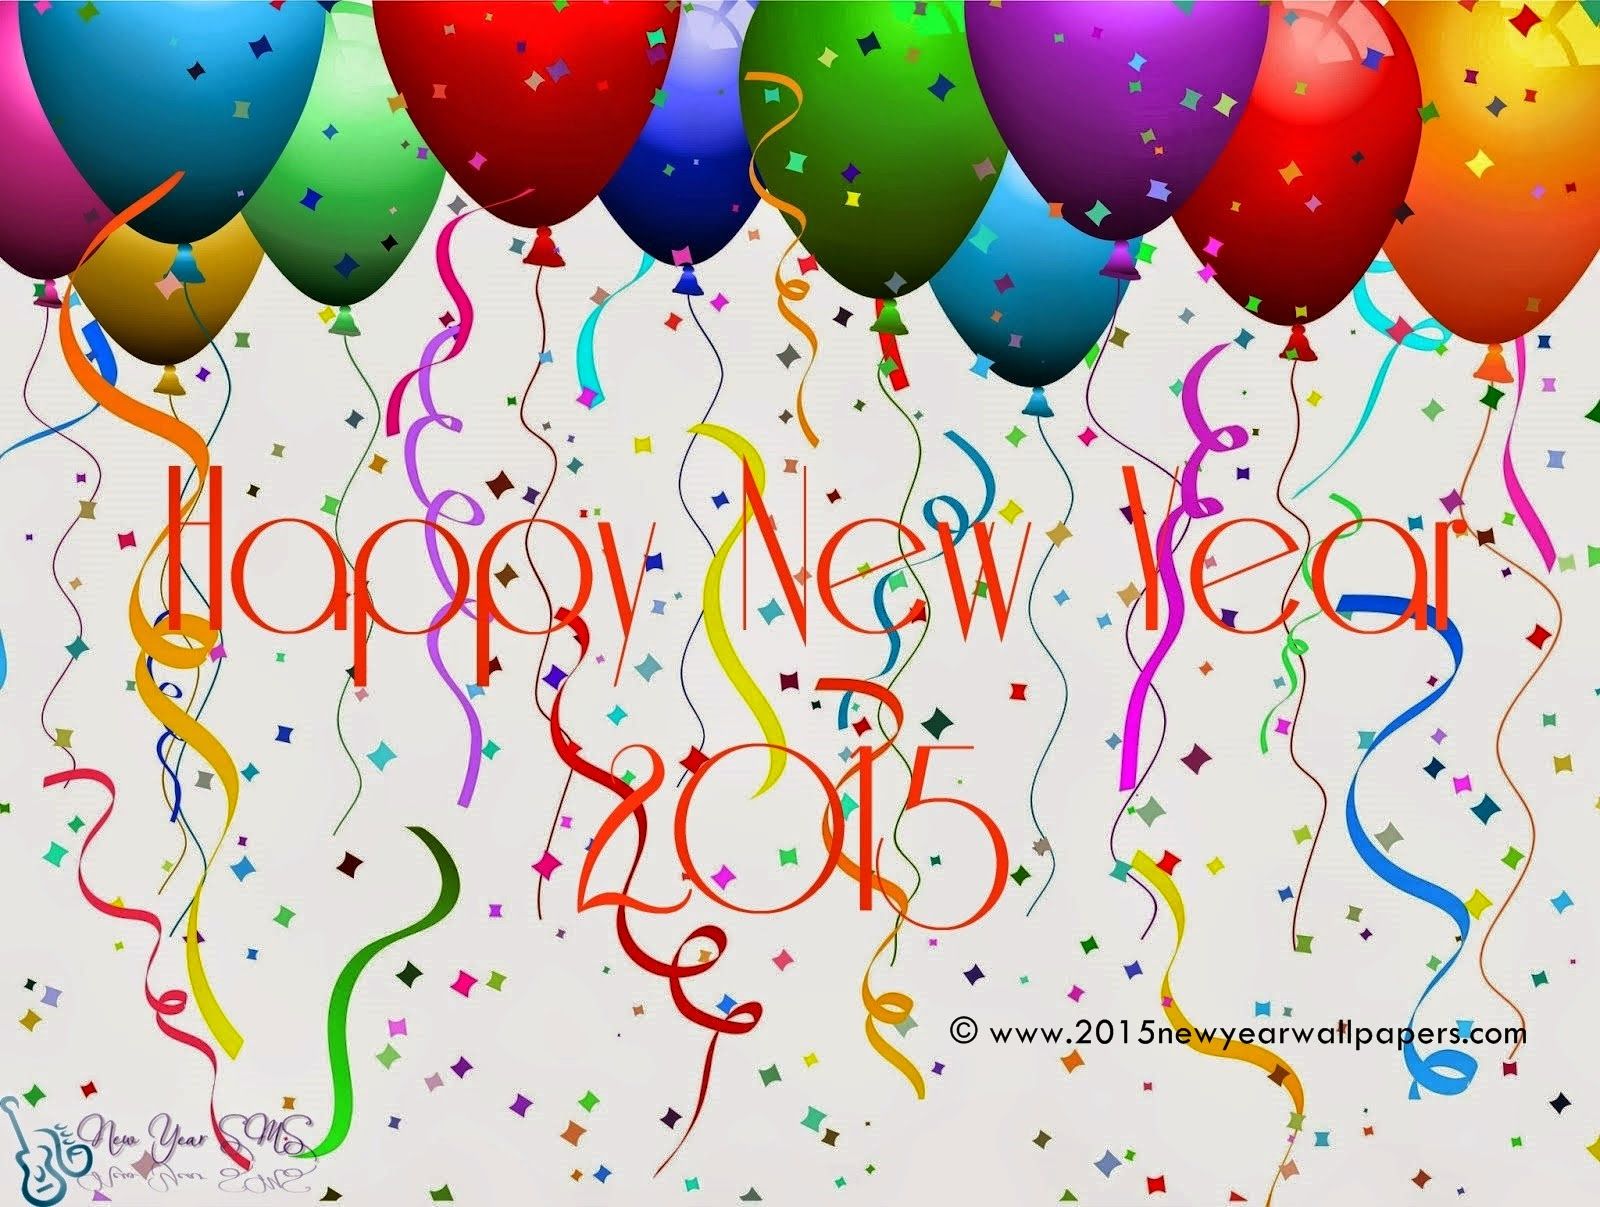 Happy New Year Wallpapers 2016 {HD} Free Download - 2016 new year ...